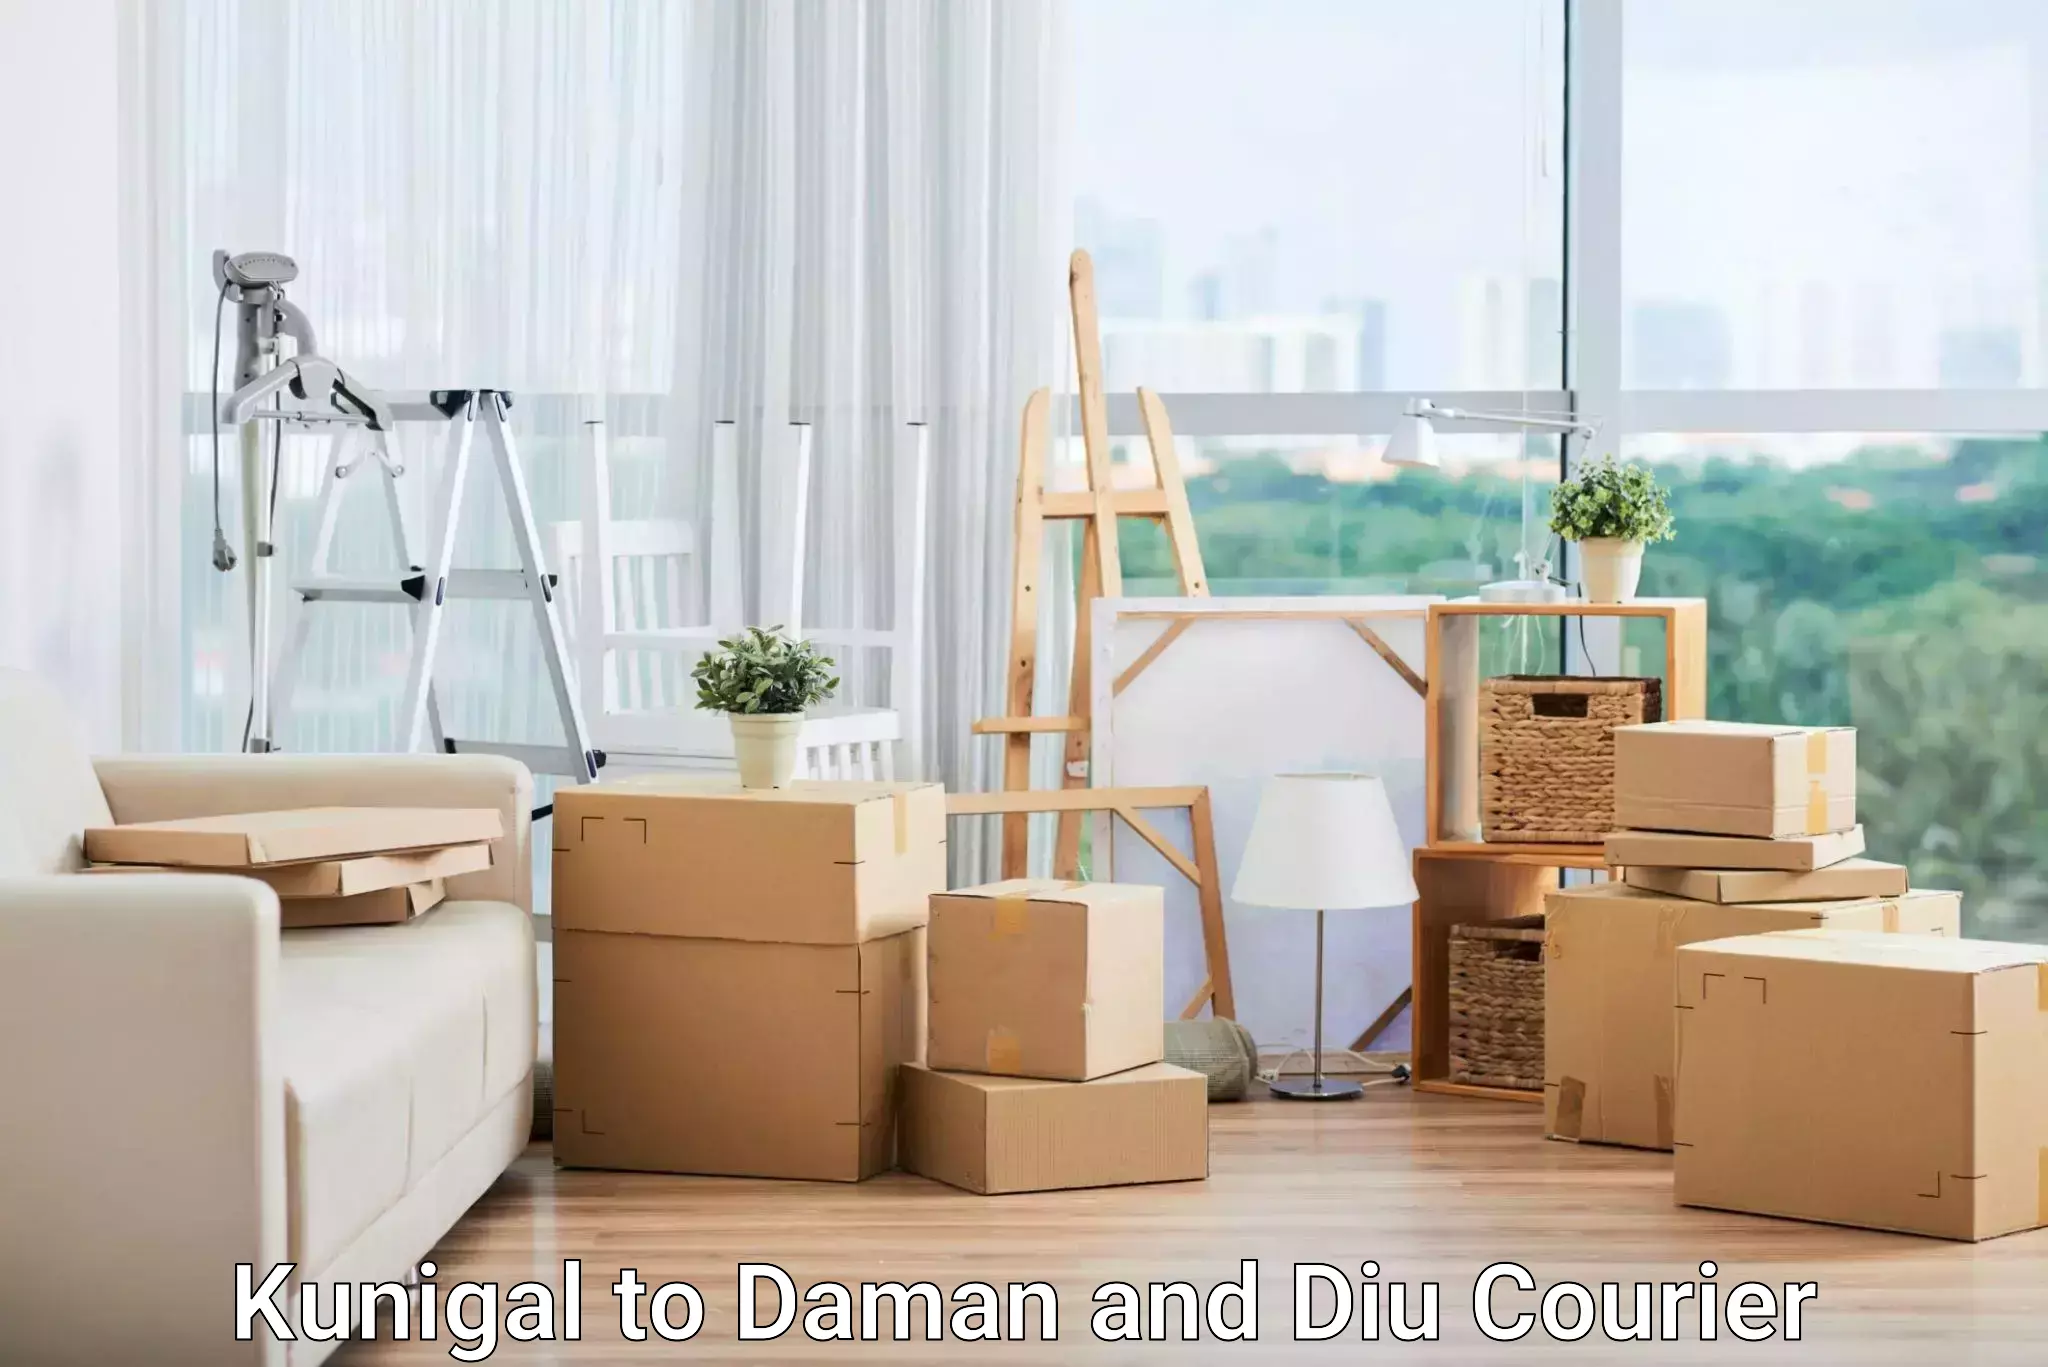 Rapid shipping services Kunigal to Daman and Diu